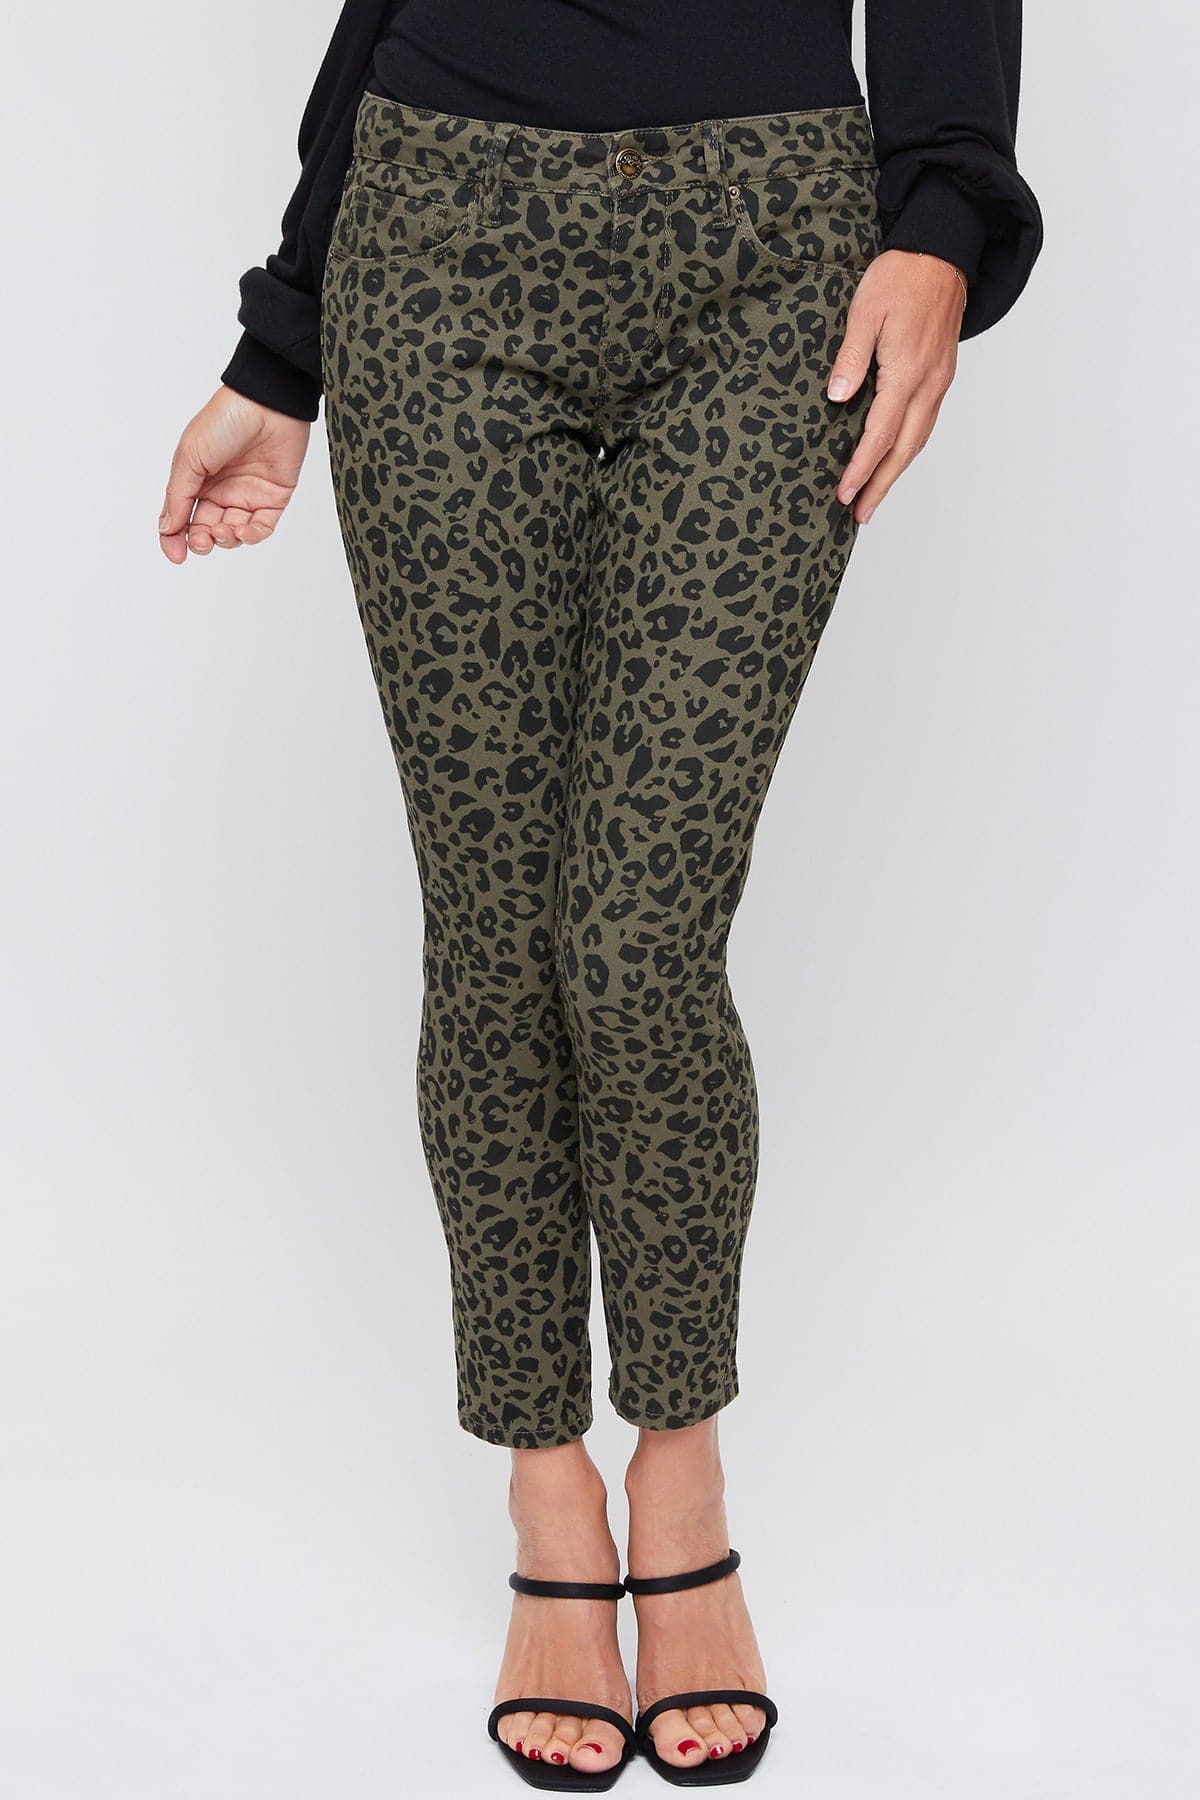 Women's Mid Rise Animal Print Ankle Jean